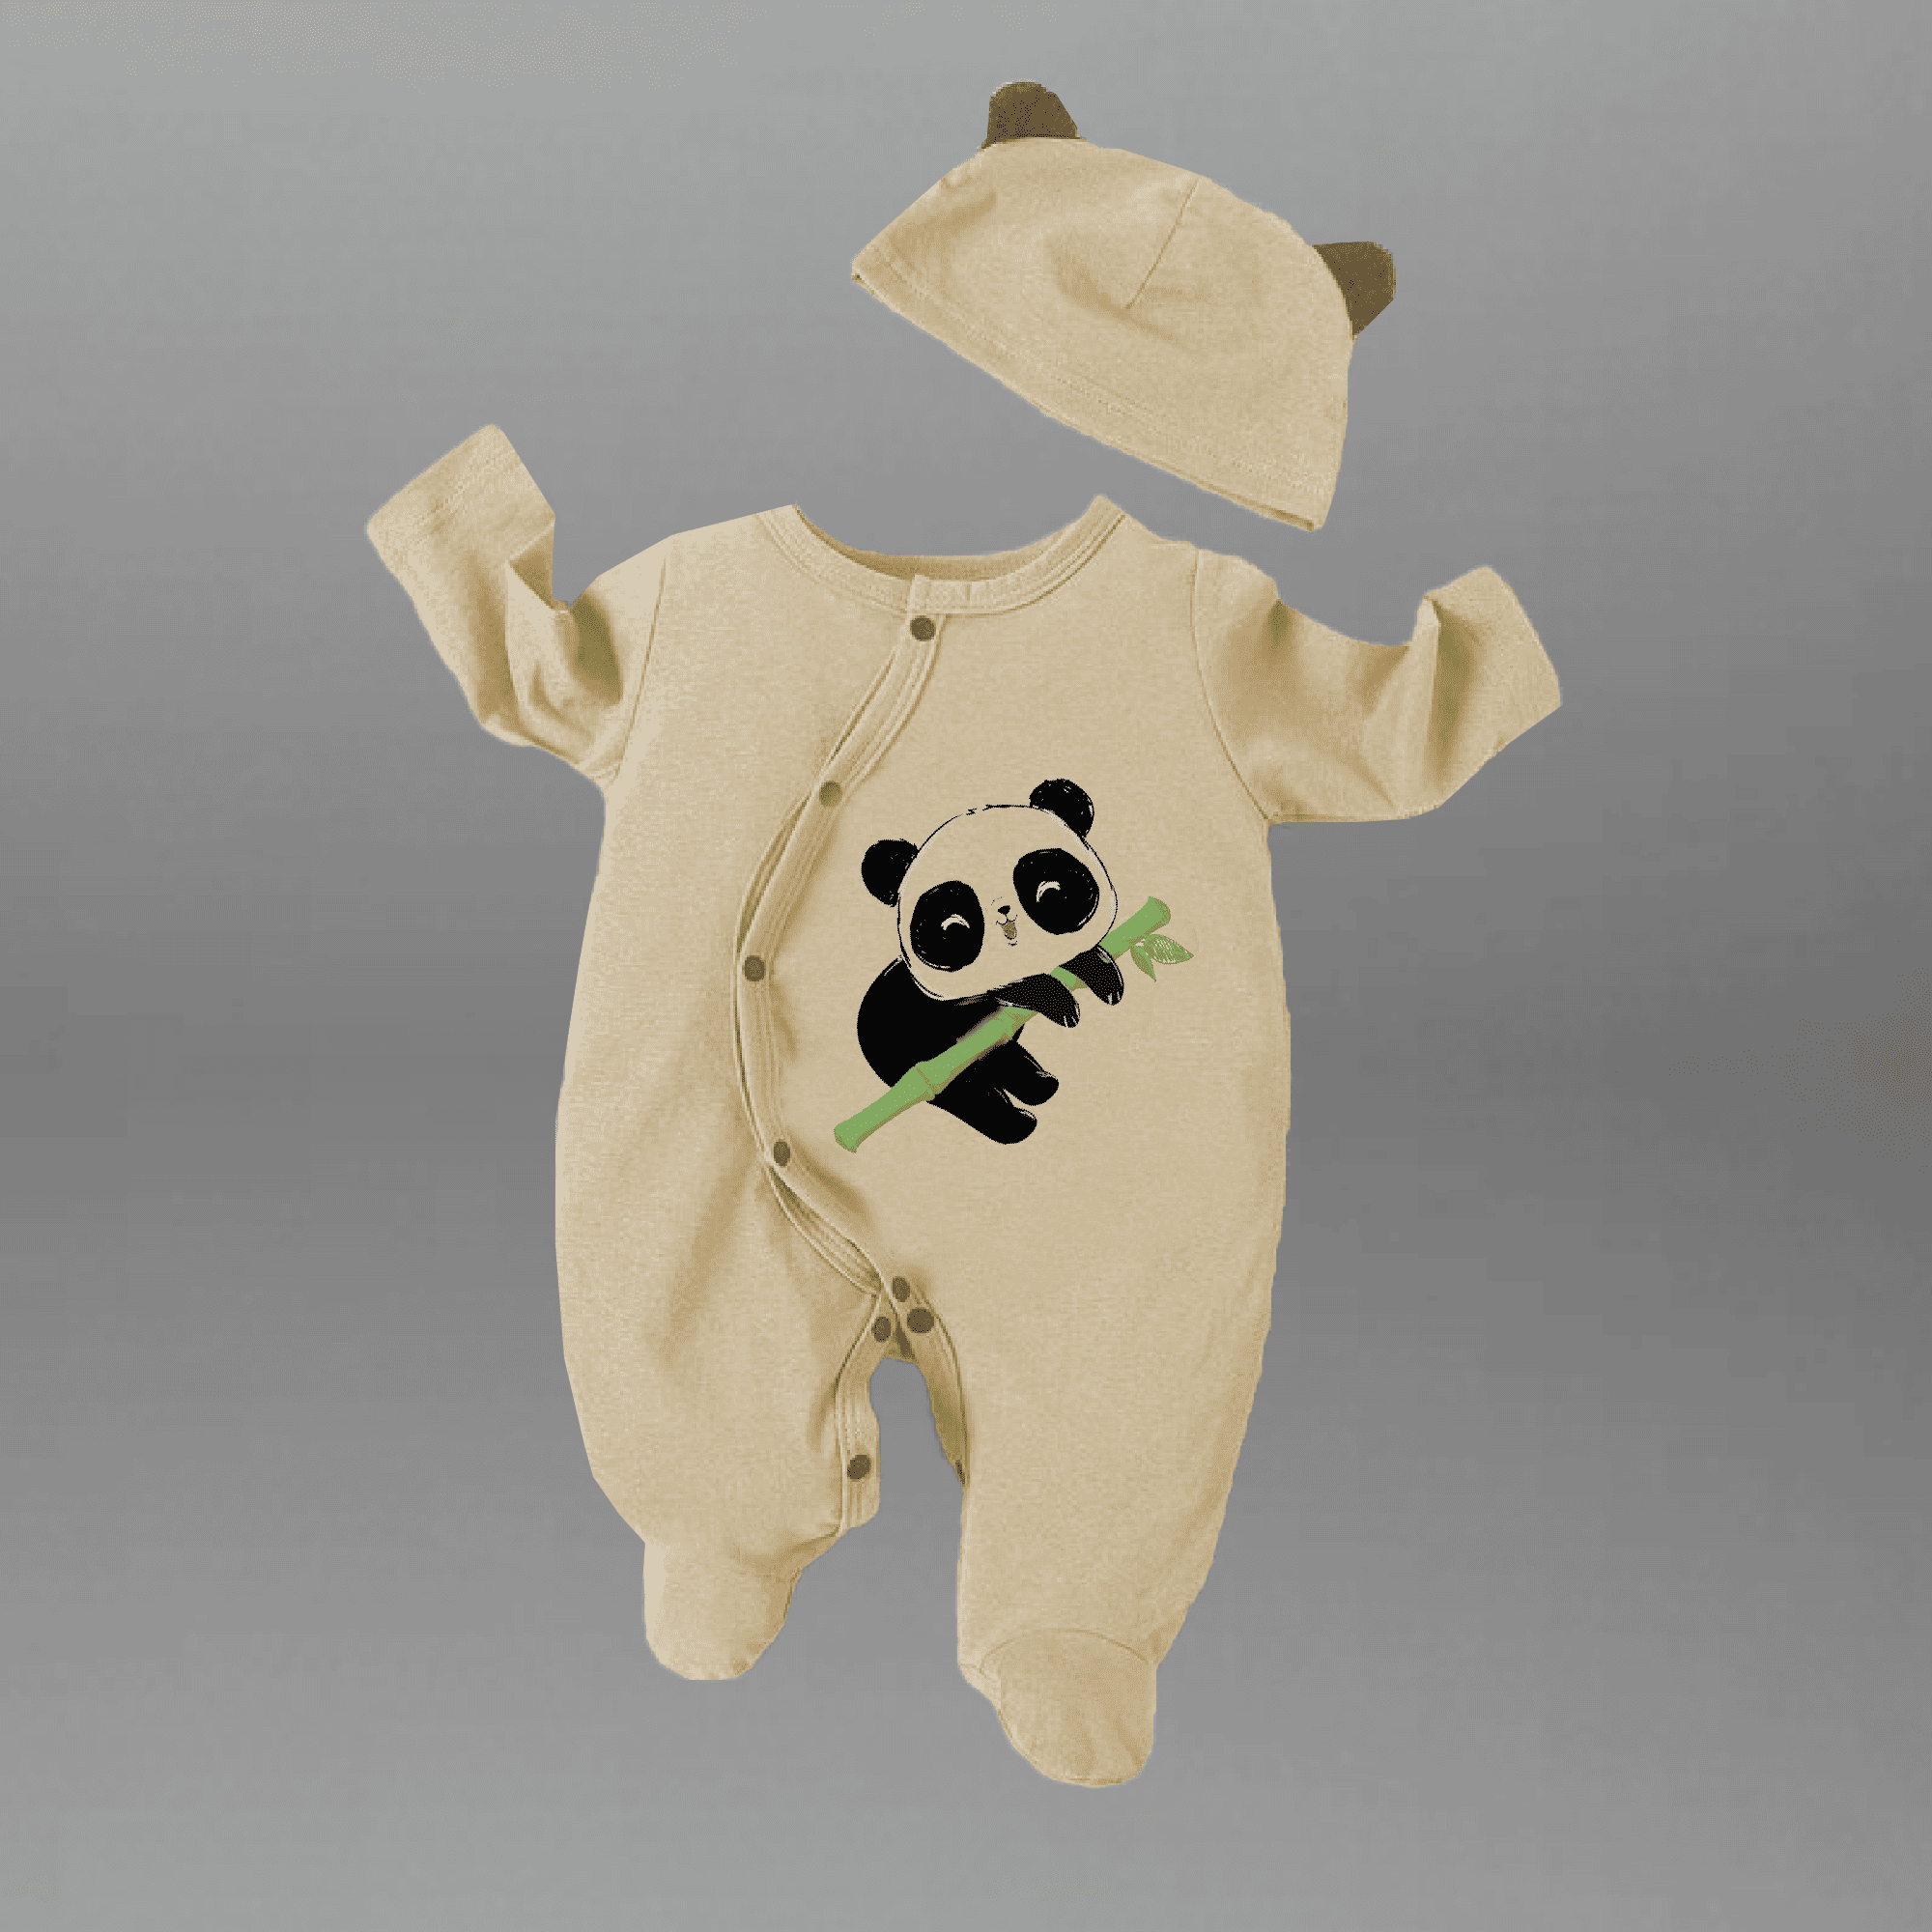 Toddler's Light Yellow Romper with cute lazy panda motif and a free cap-RKFCTT106